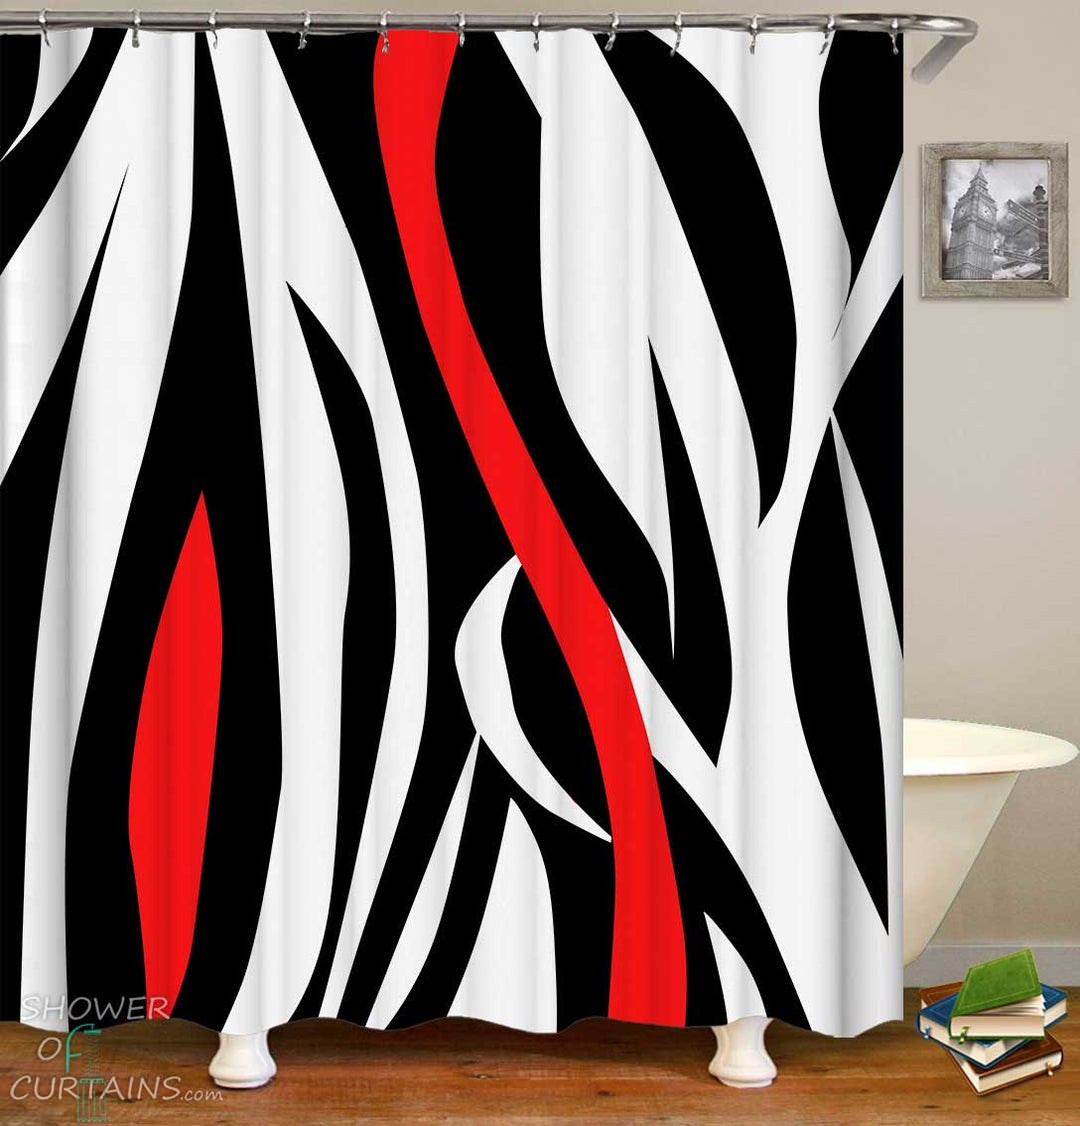 Shower Curtains with Artistic Red Black White 